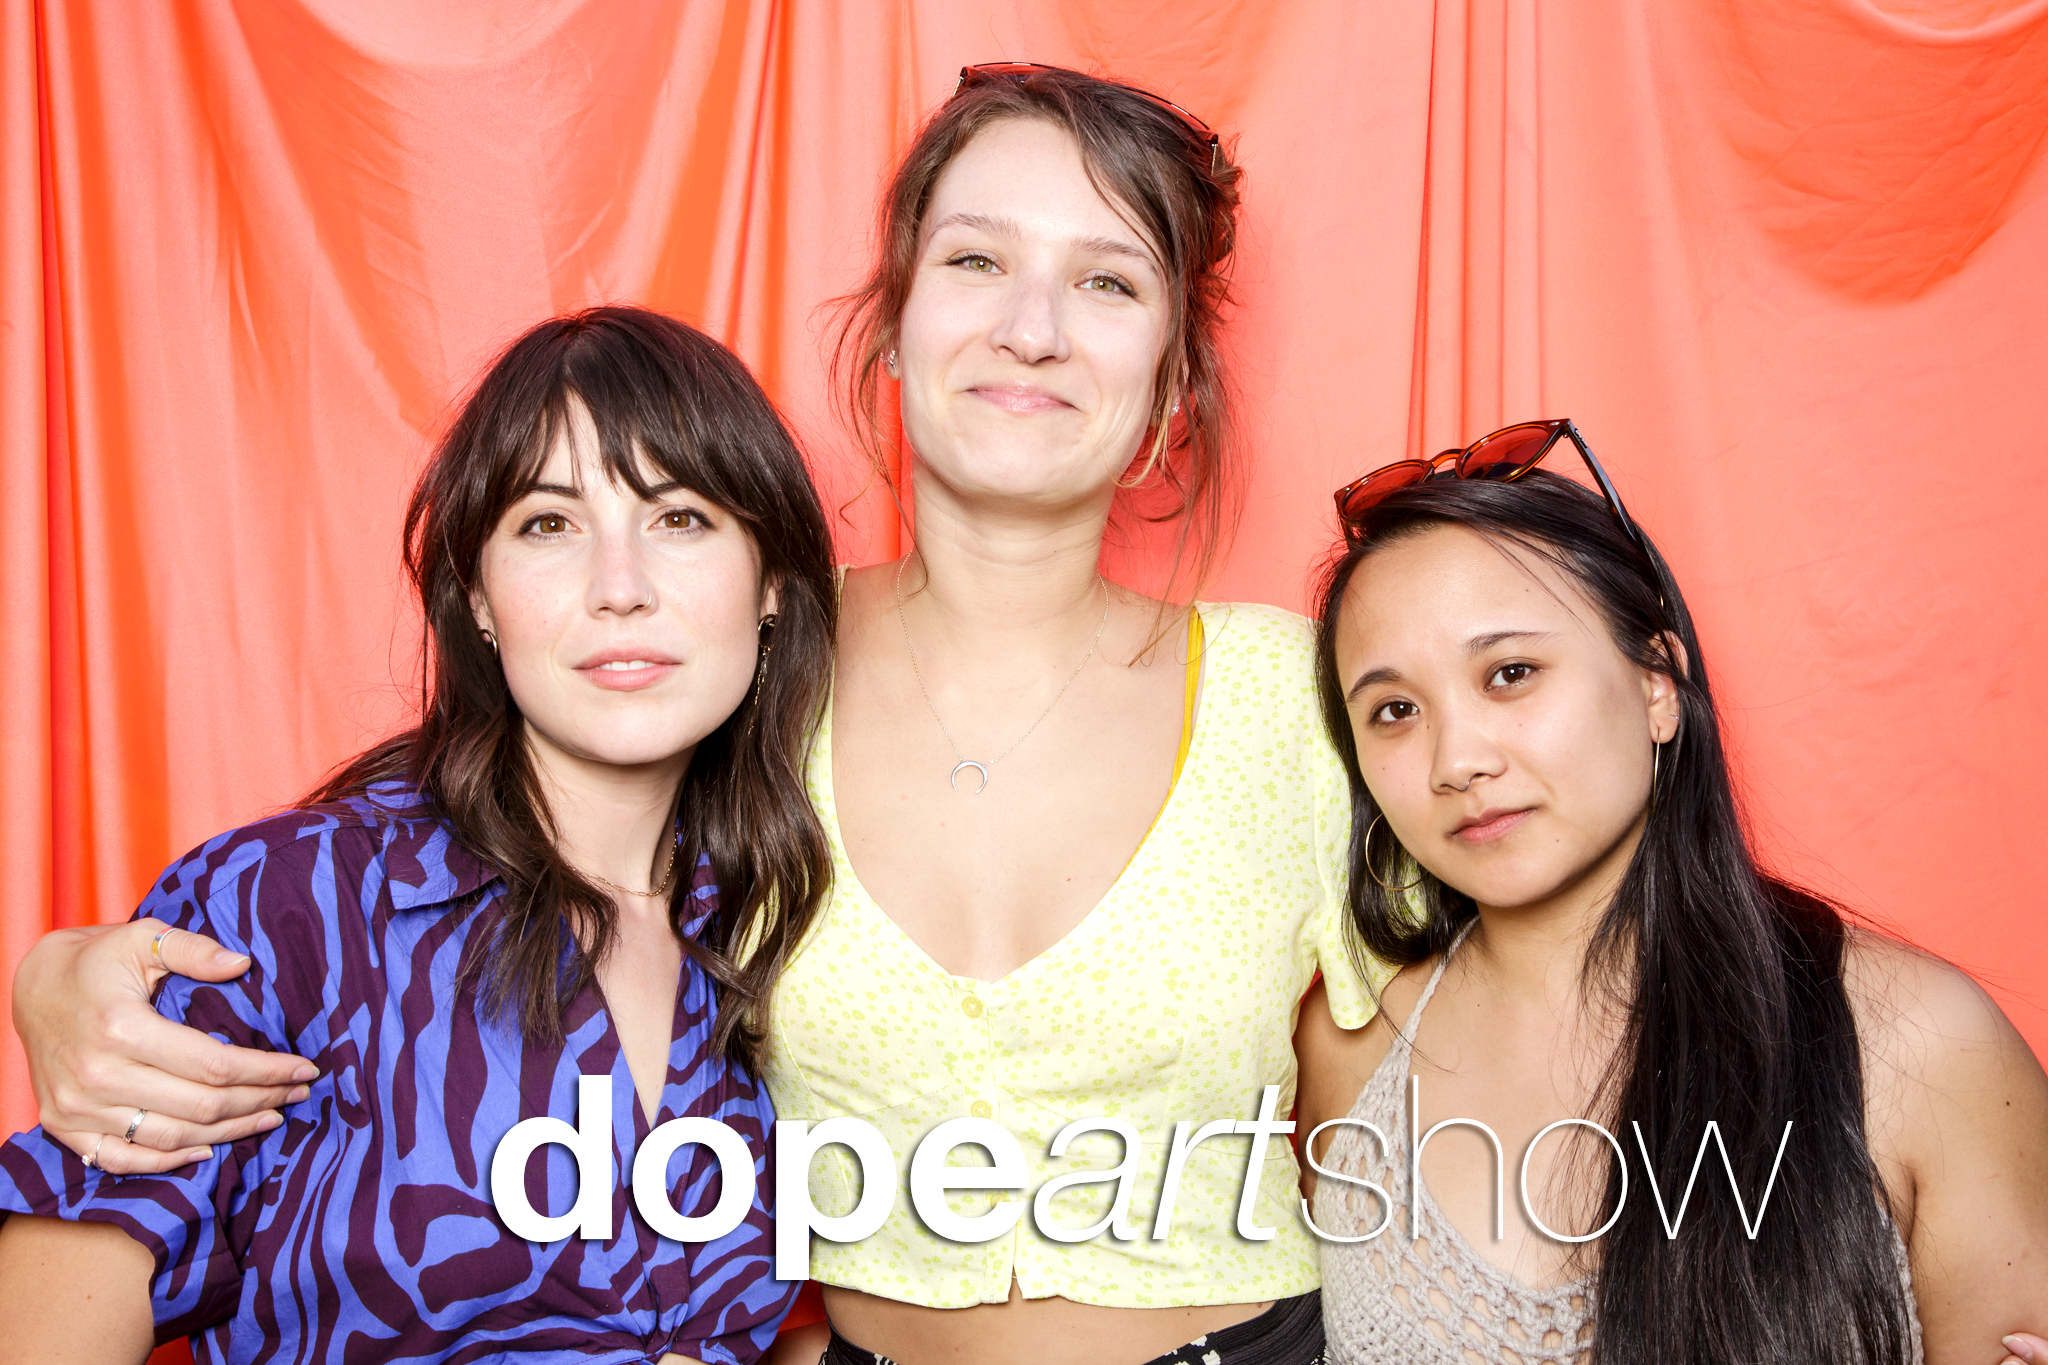 glitterguts portrait booth photos from dope art show at ludlow liquors, chicago 2022